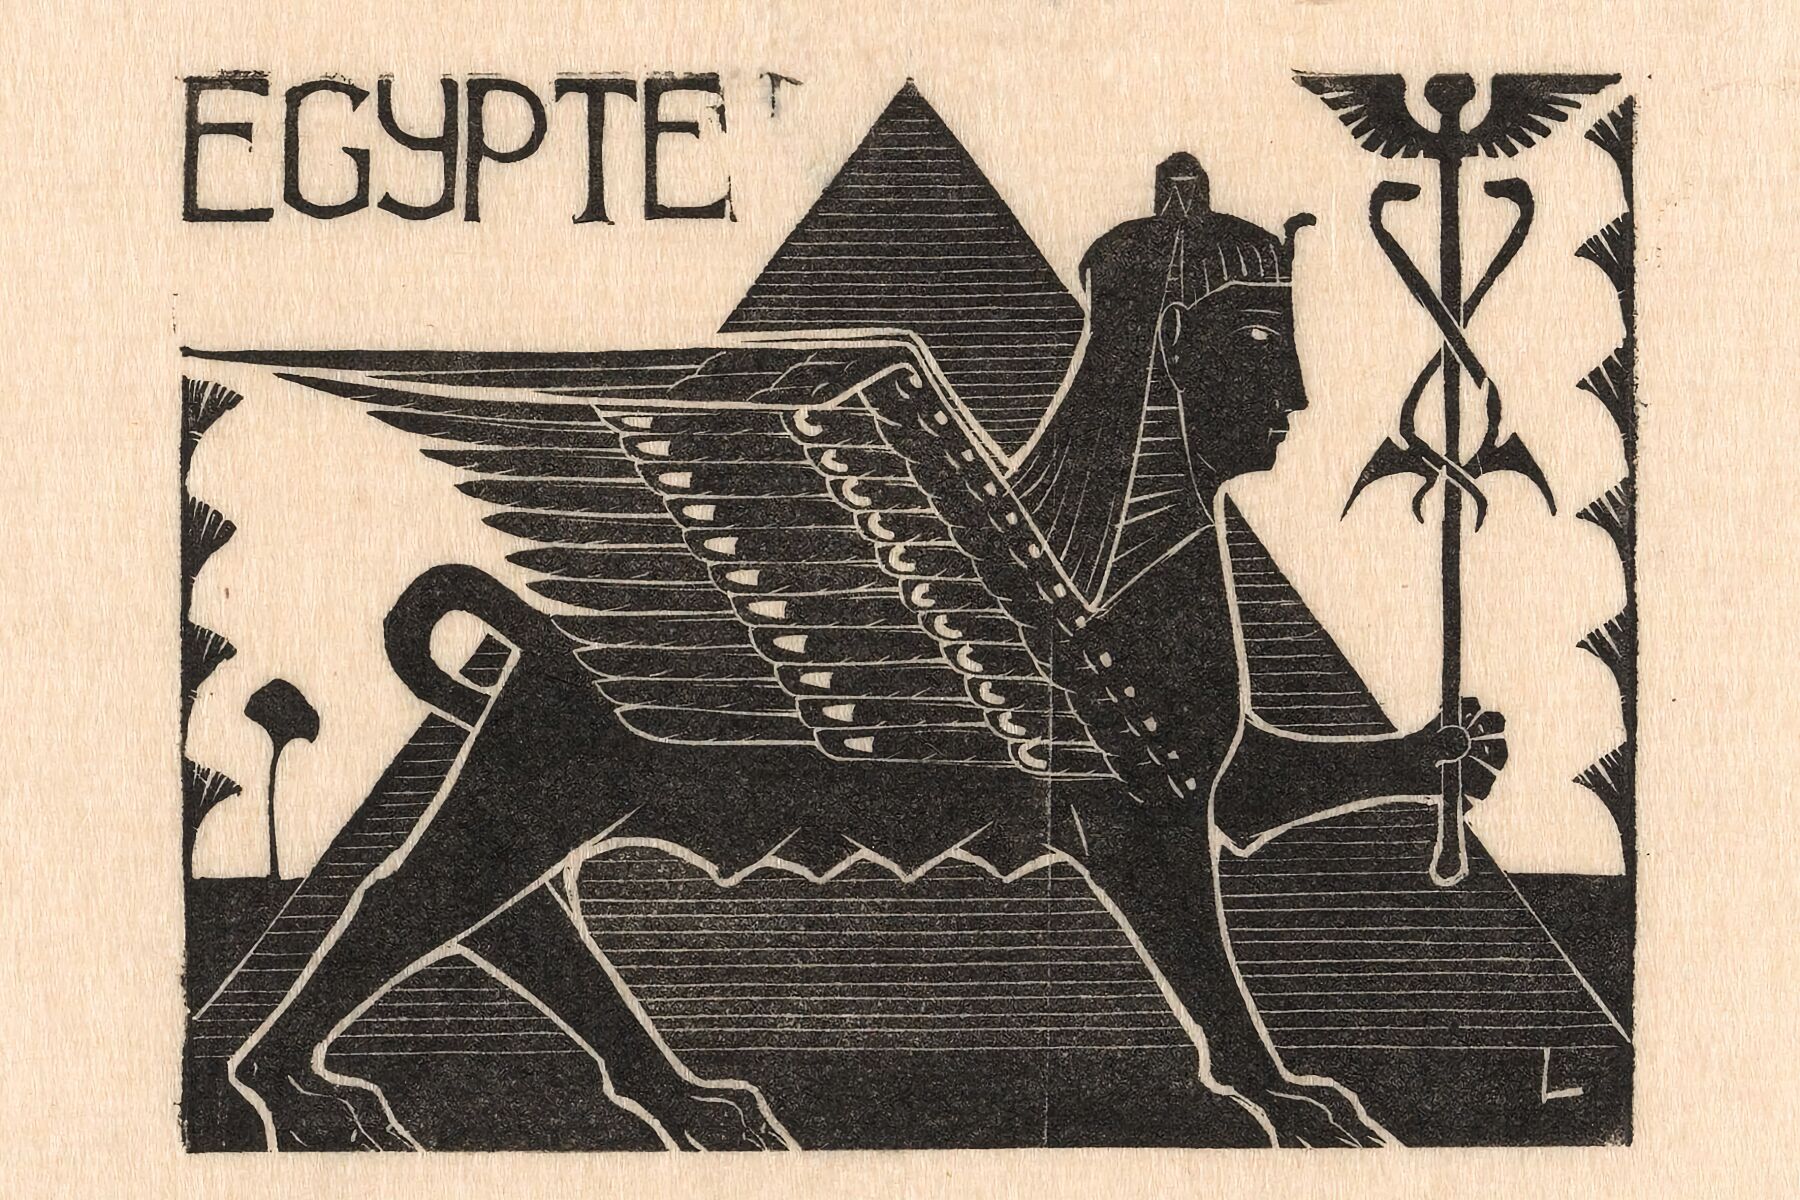 Sphinx and Pyramid by Mathieu Lauweriks - 1935